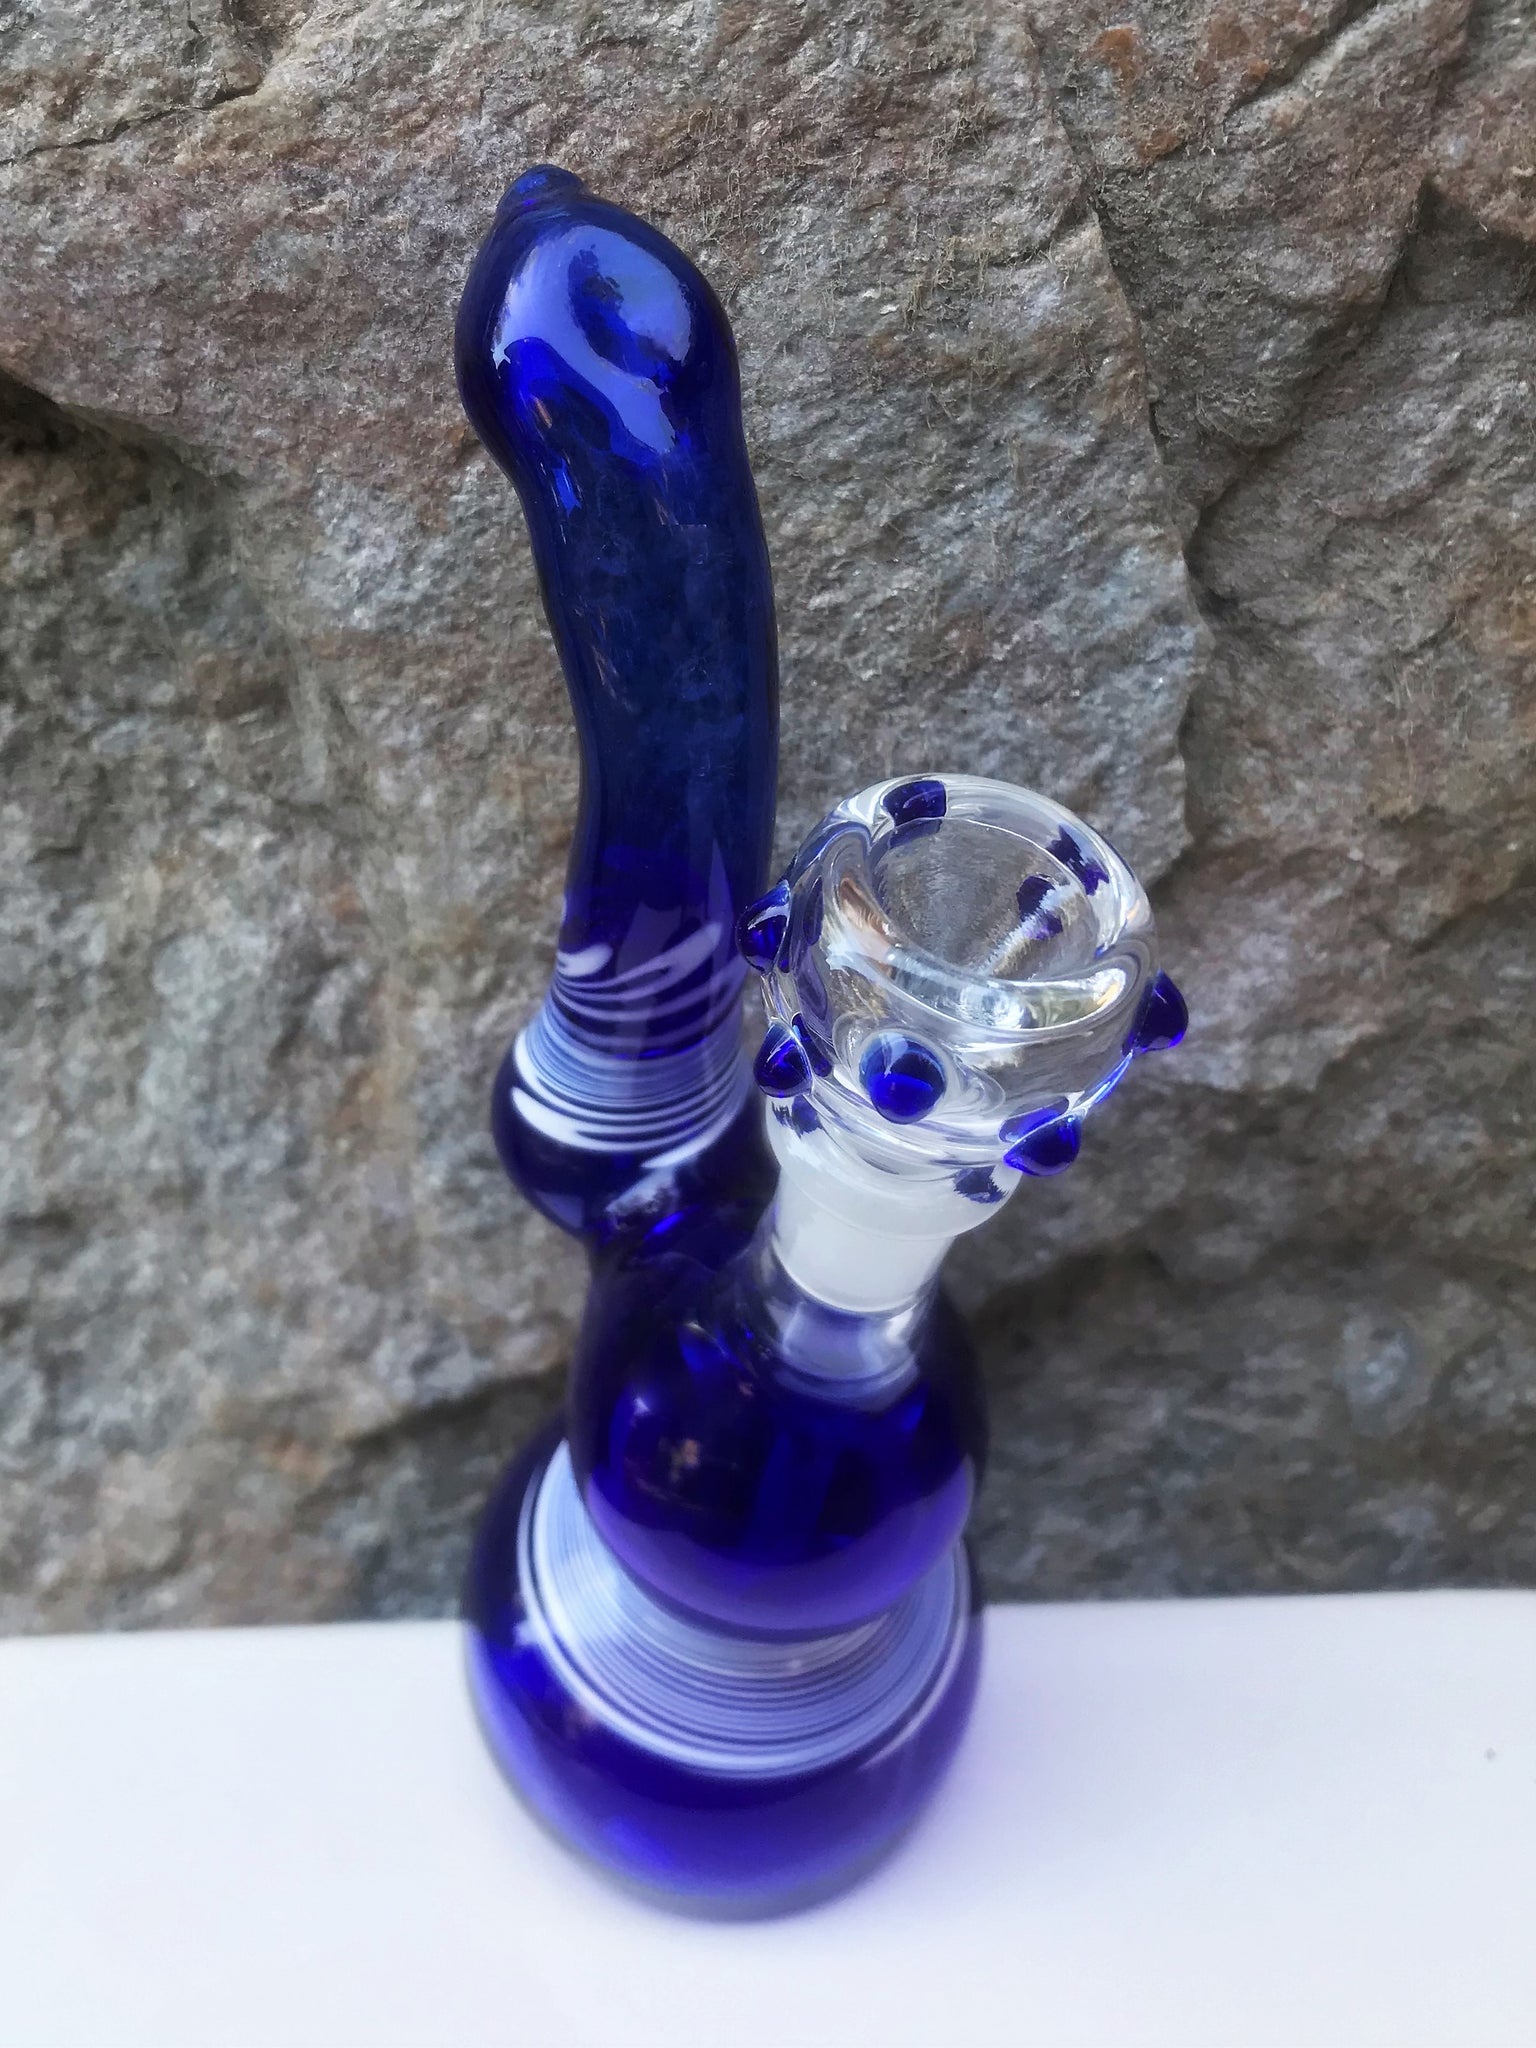 New! Handmade 6 Bubbler/Pipe Blue Glass with 14mm Male Bowl - Why Not